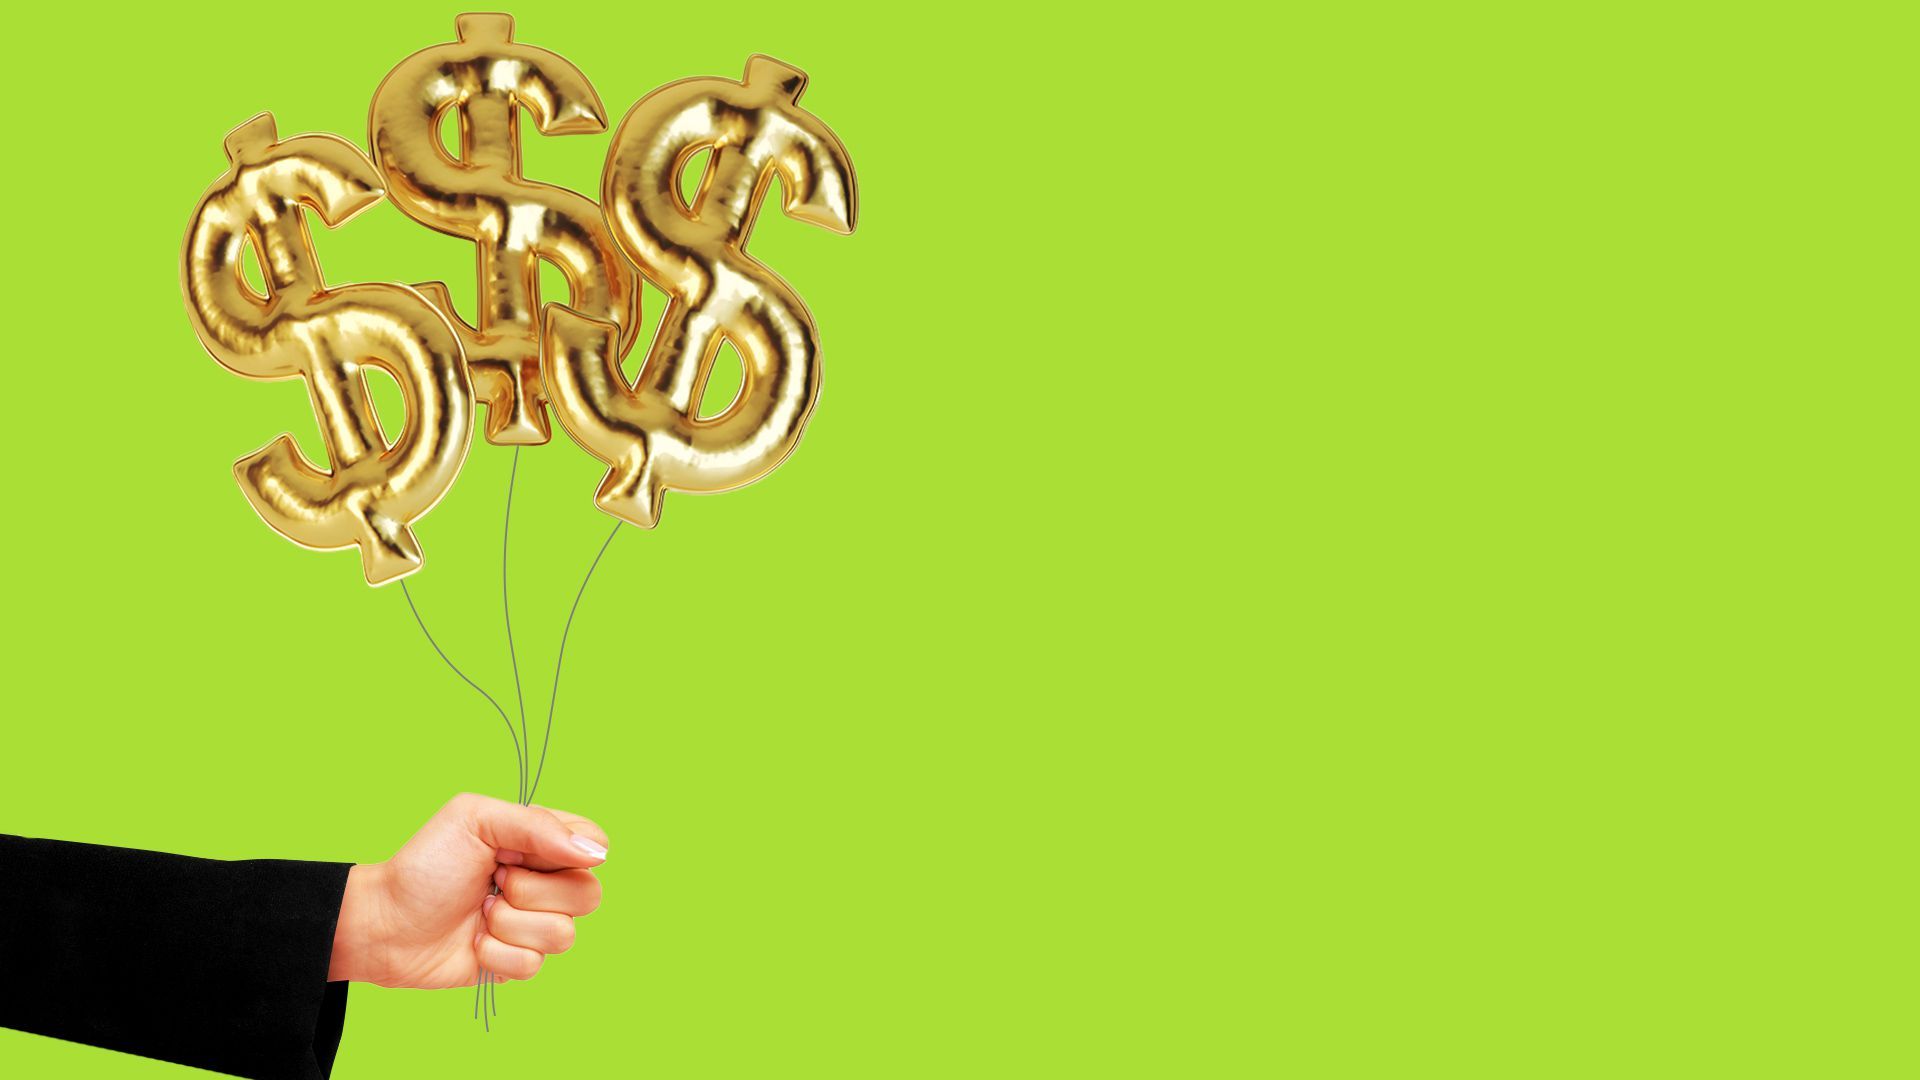 Illustration of a hand holding dollar sign balloons. 